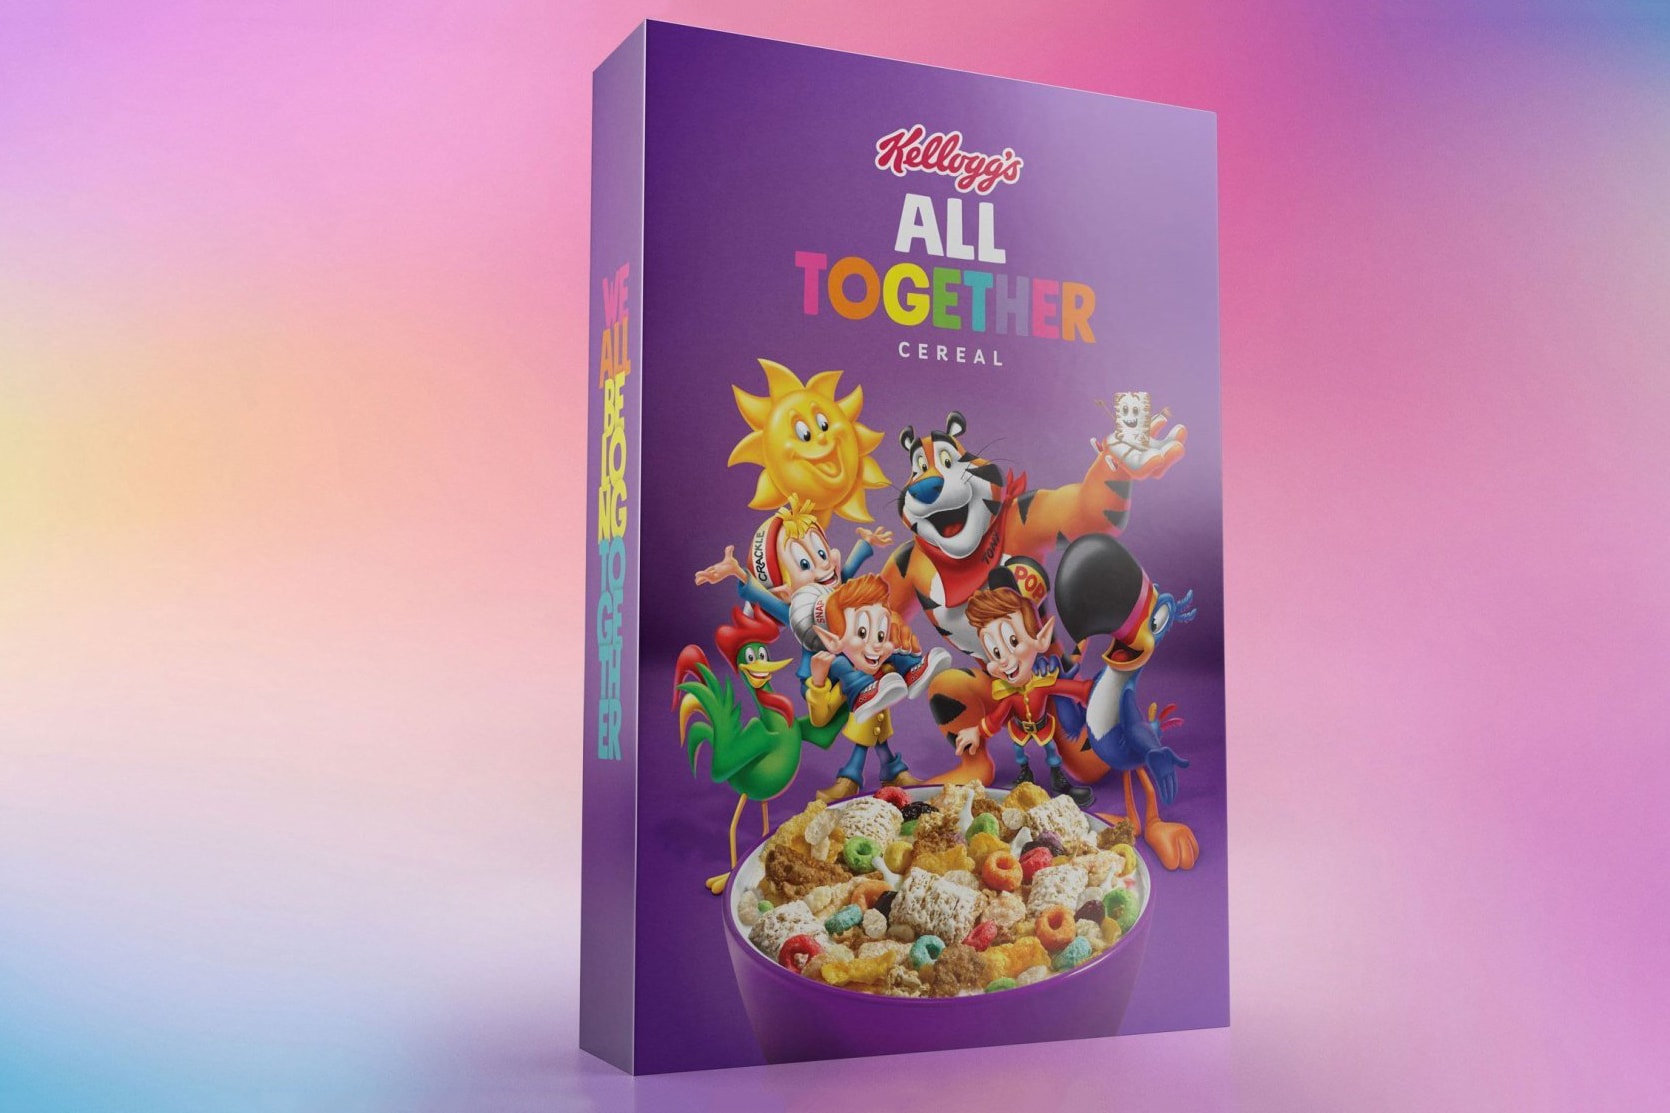 Kellogg's & GLAAD's Drop All Together Cereal anti-bullying campaign lgbtq lgbtq+ lgbtq plus Raisin Bran, Corn Flakes, Rice Krispies, Frosted Flakes, Froot Loops and Frosted Mini Wheats